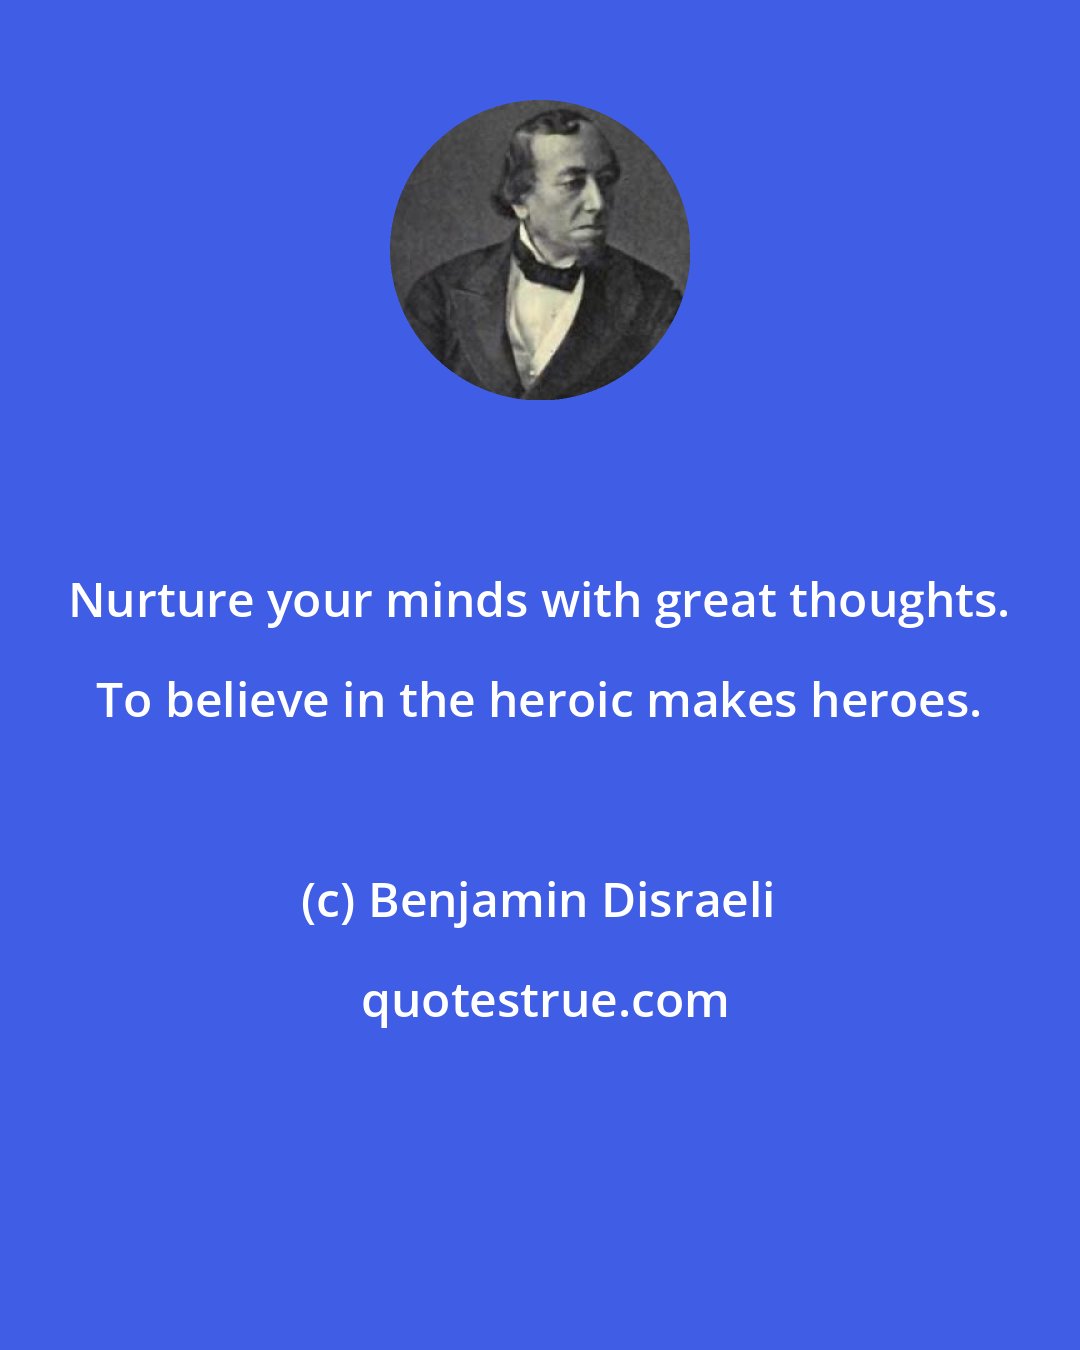 Benjamin Disraeli: Nurture your minds with great thoughts. To believe in the heroic makes heroes.